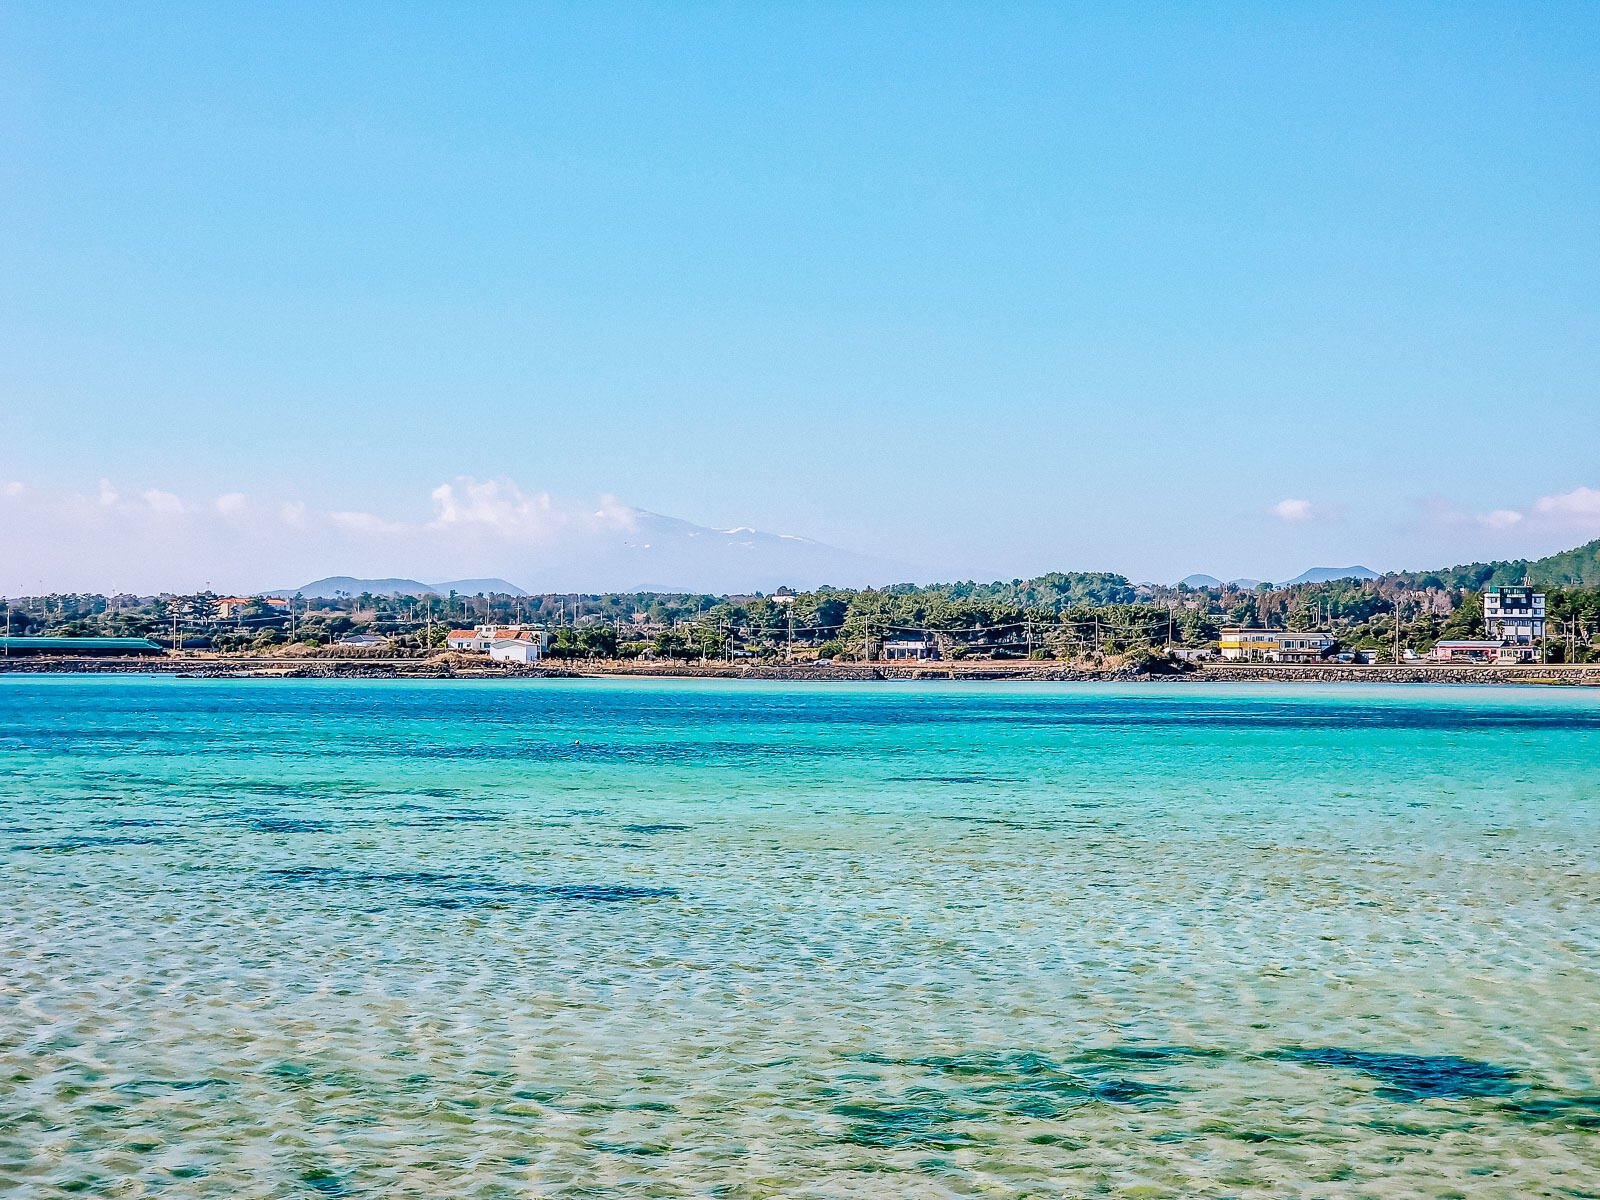 calm, crystal clear turquoise waters in a bay with a small town and trees visible on the other side